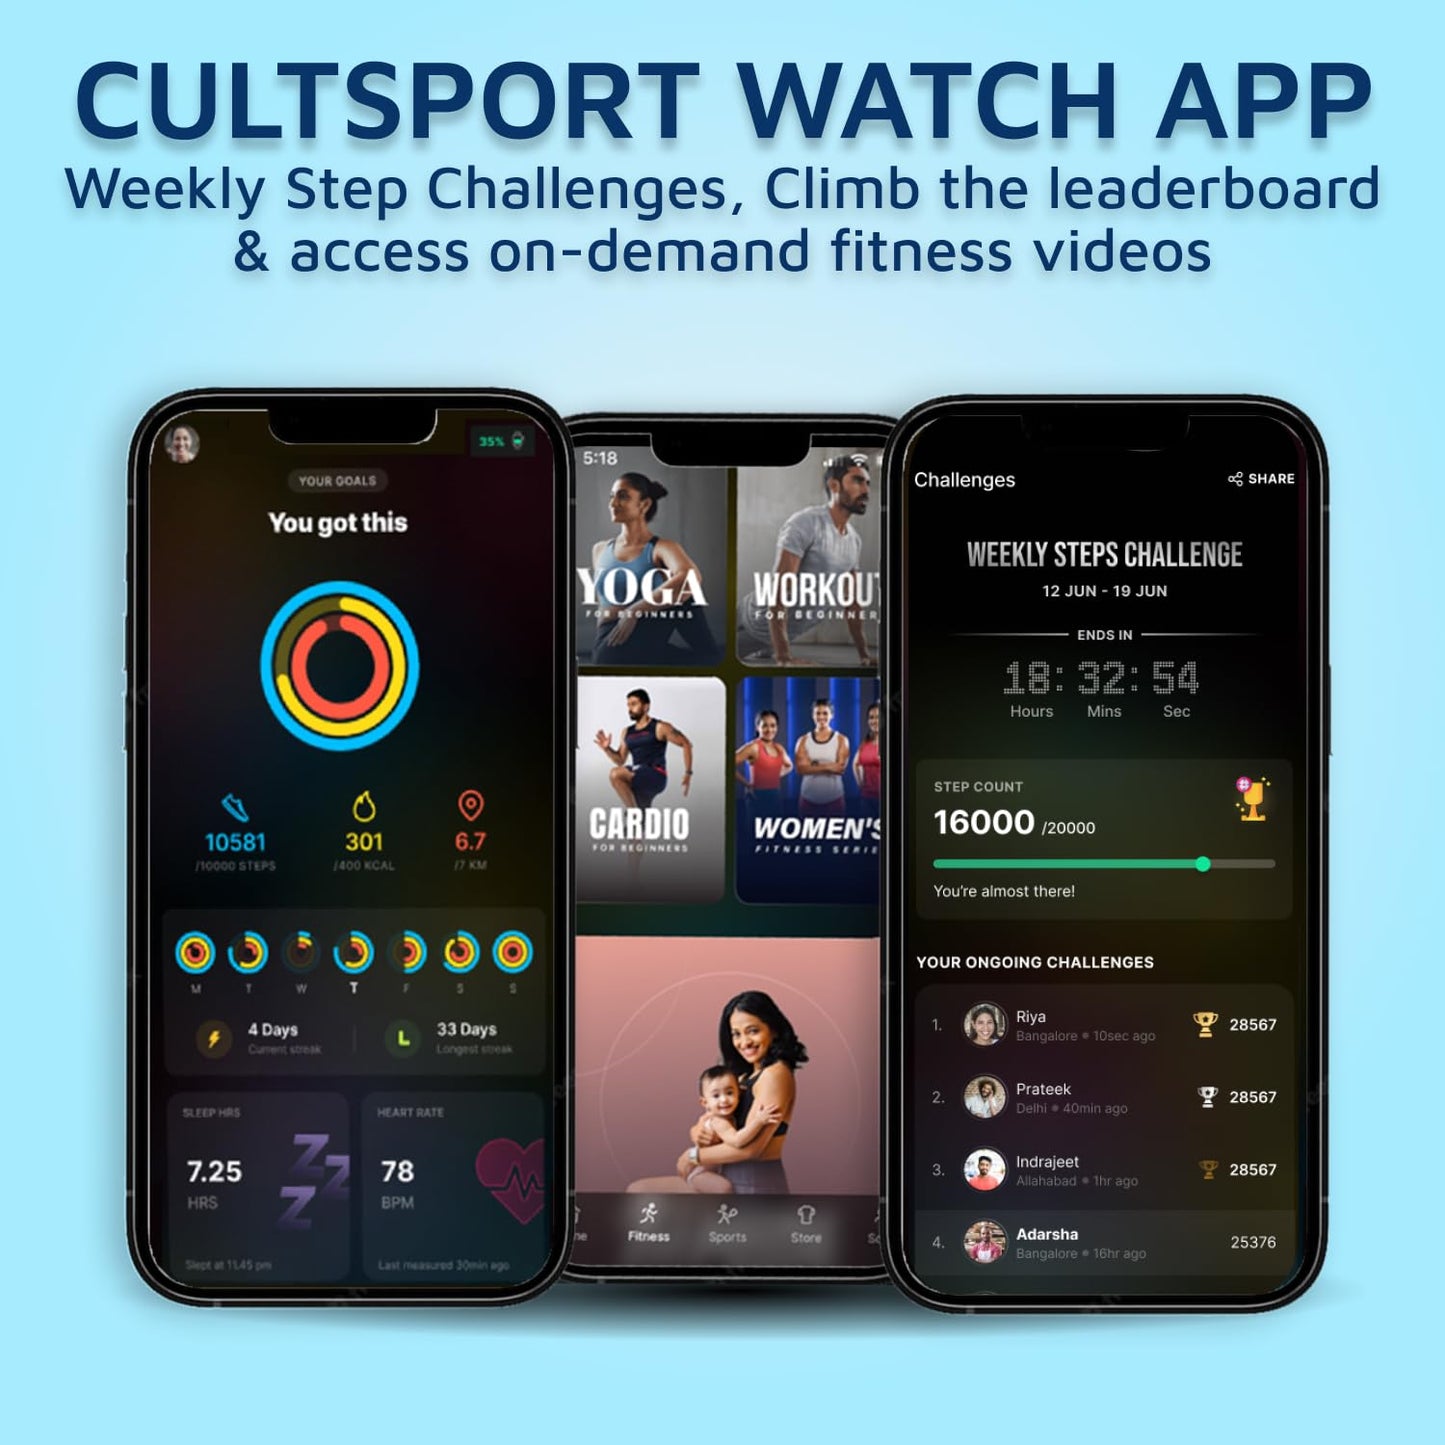 Cultsport Burn Plus 1.78" Amoled, Live Cricket Score, 368 * 448 Best-in-Class Resolution, BT Calling, Crown Control, Always on Display, 7 Days Battery Life,Stainless Steel Mesh Strap, (Black Steel)